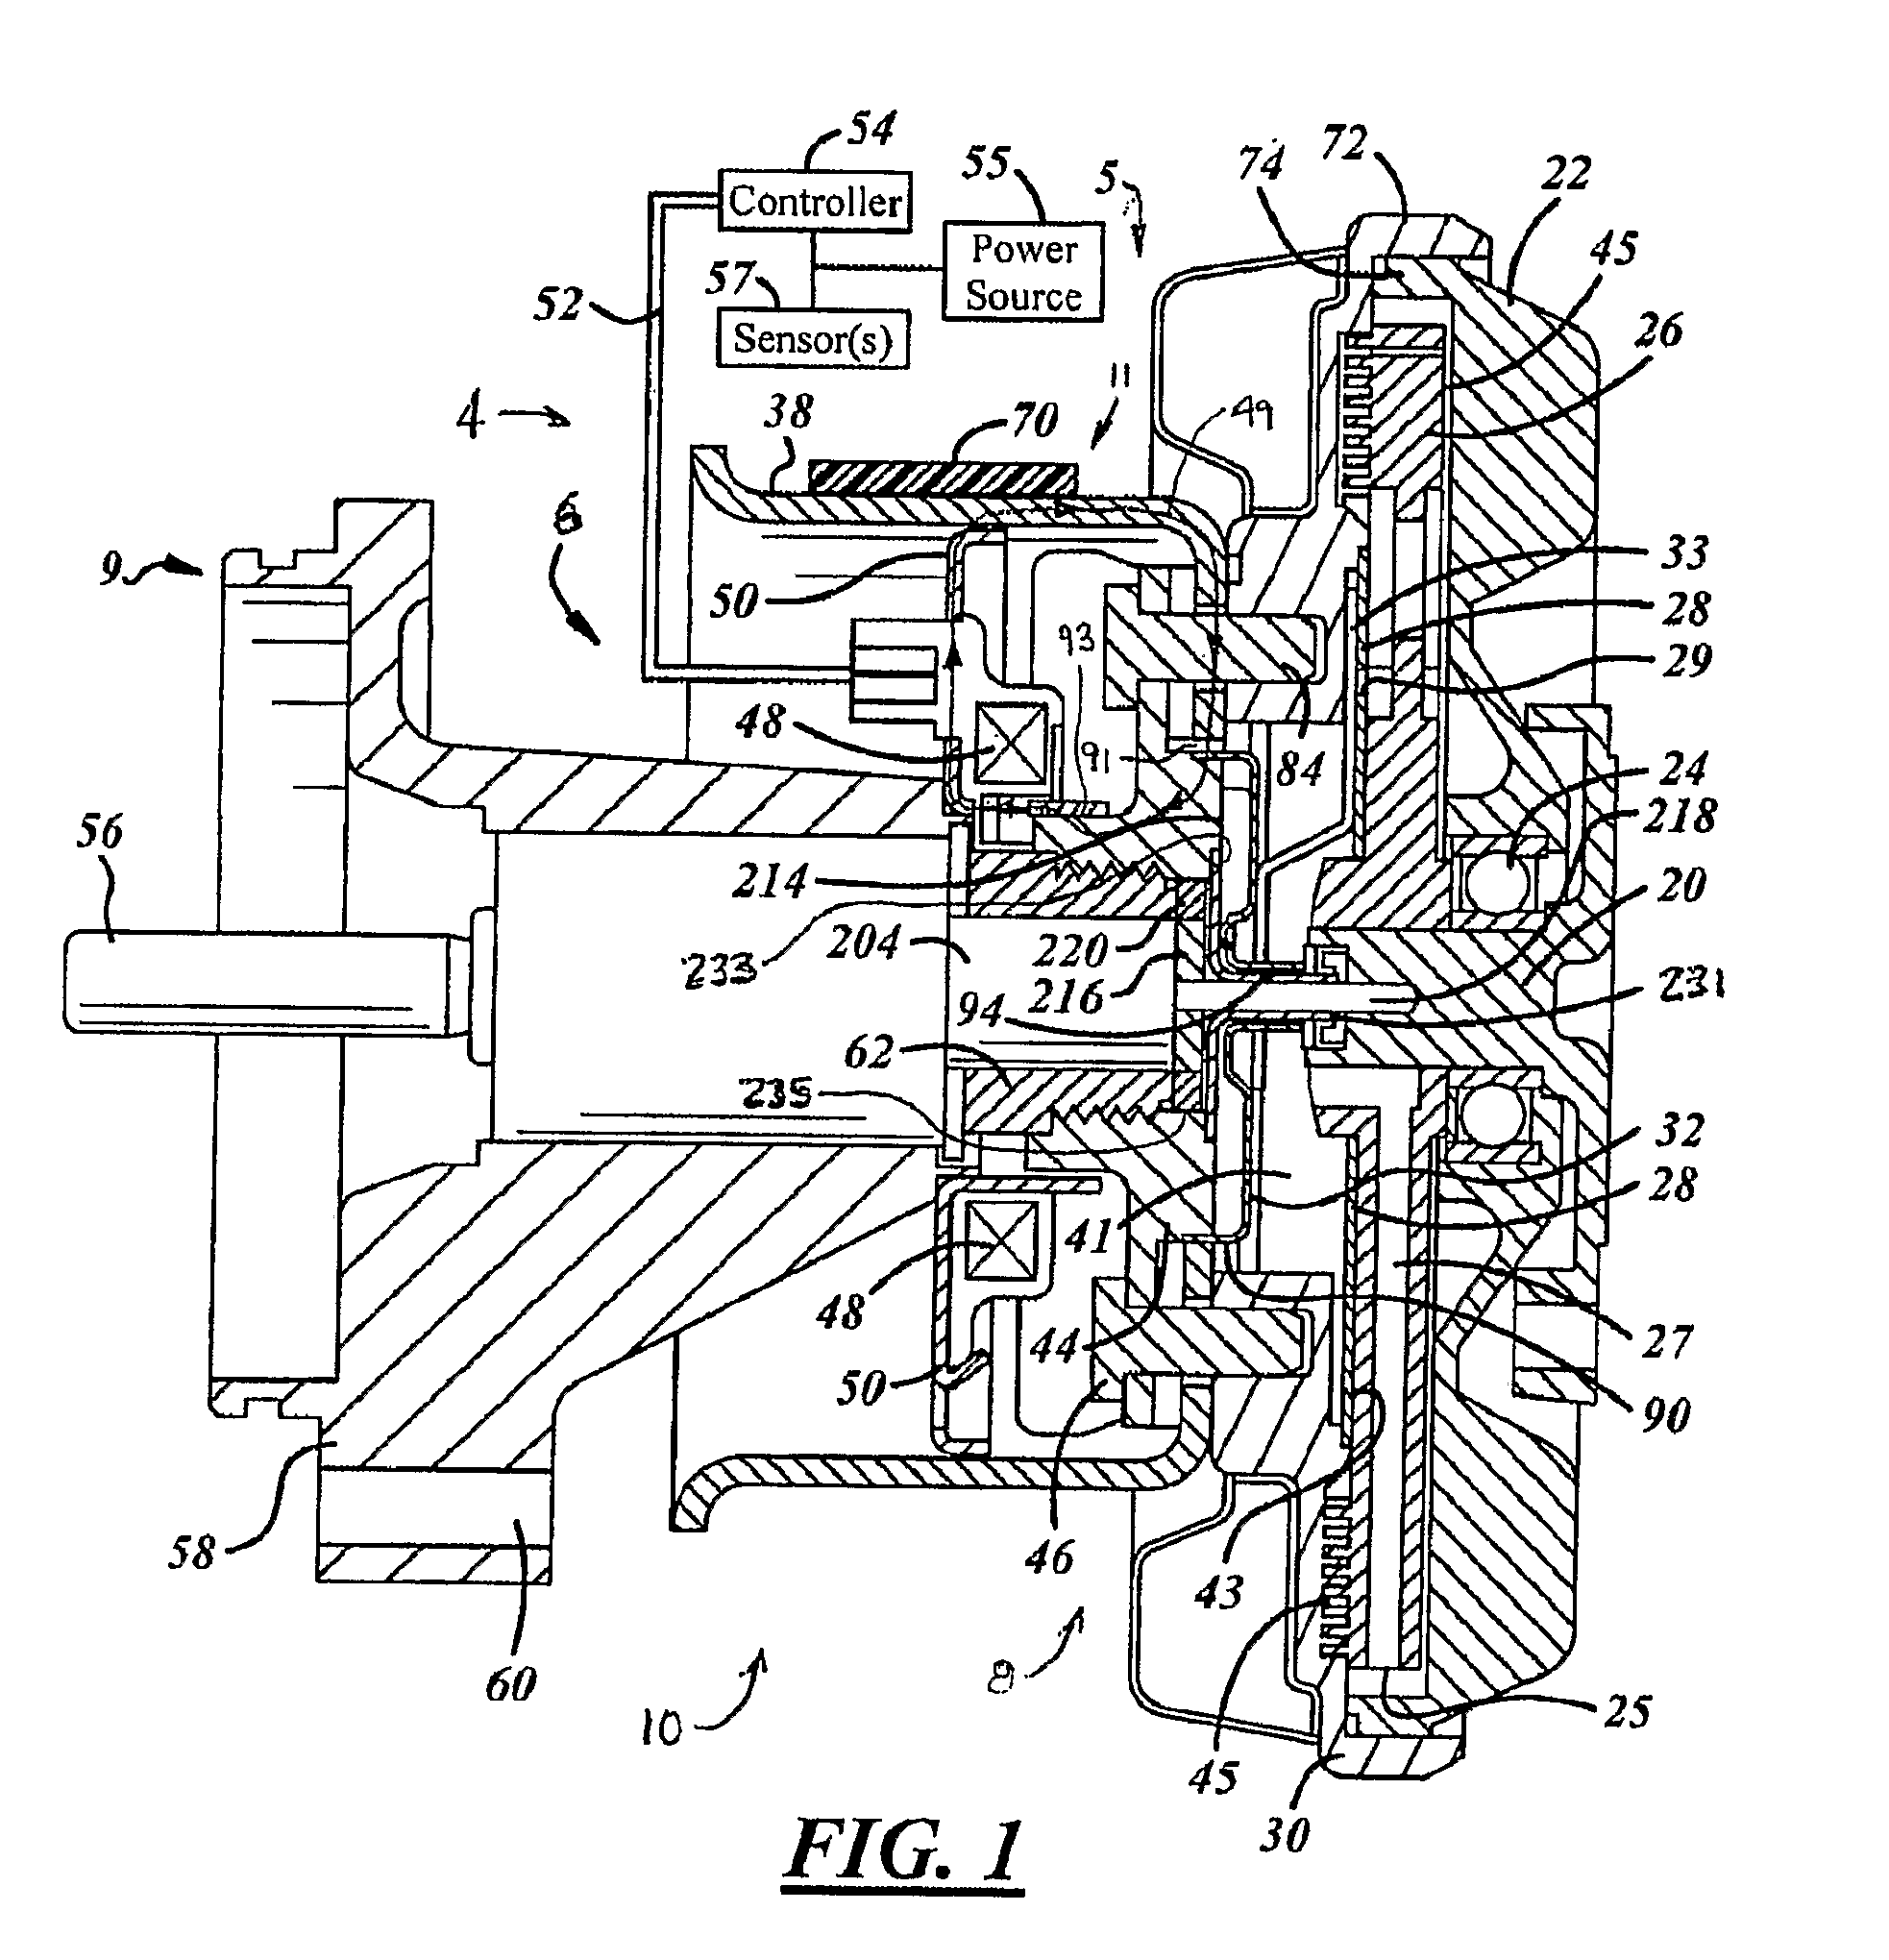 Electromagnetic differential speed control system for a fluid coupling device